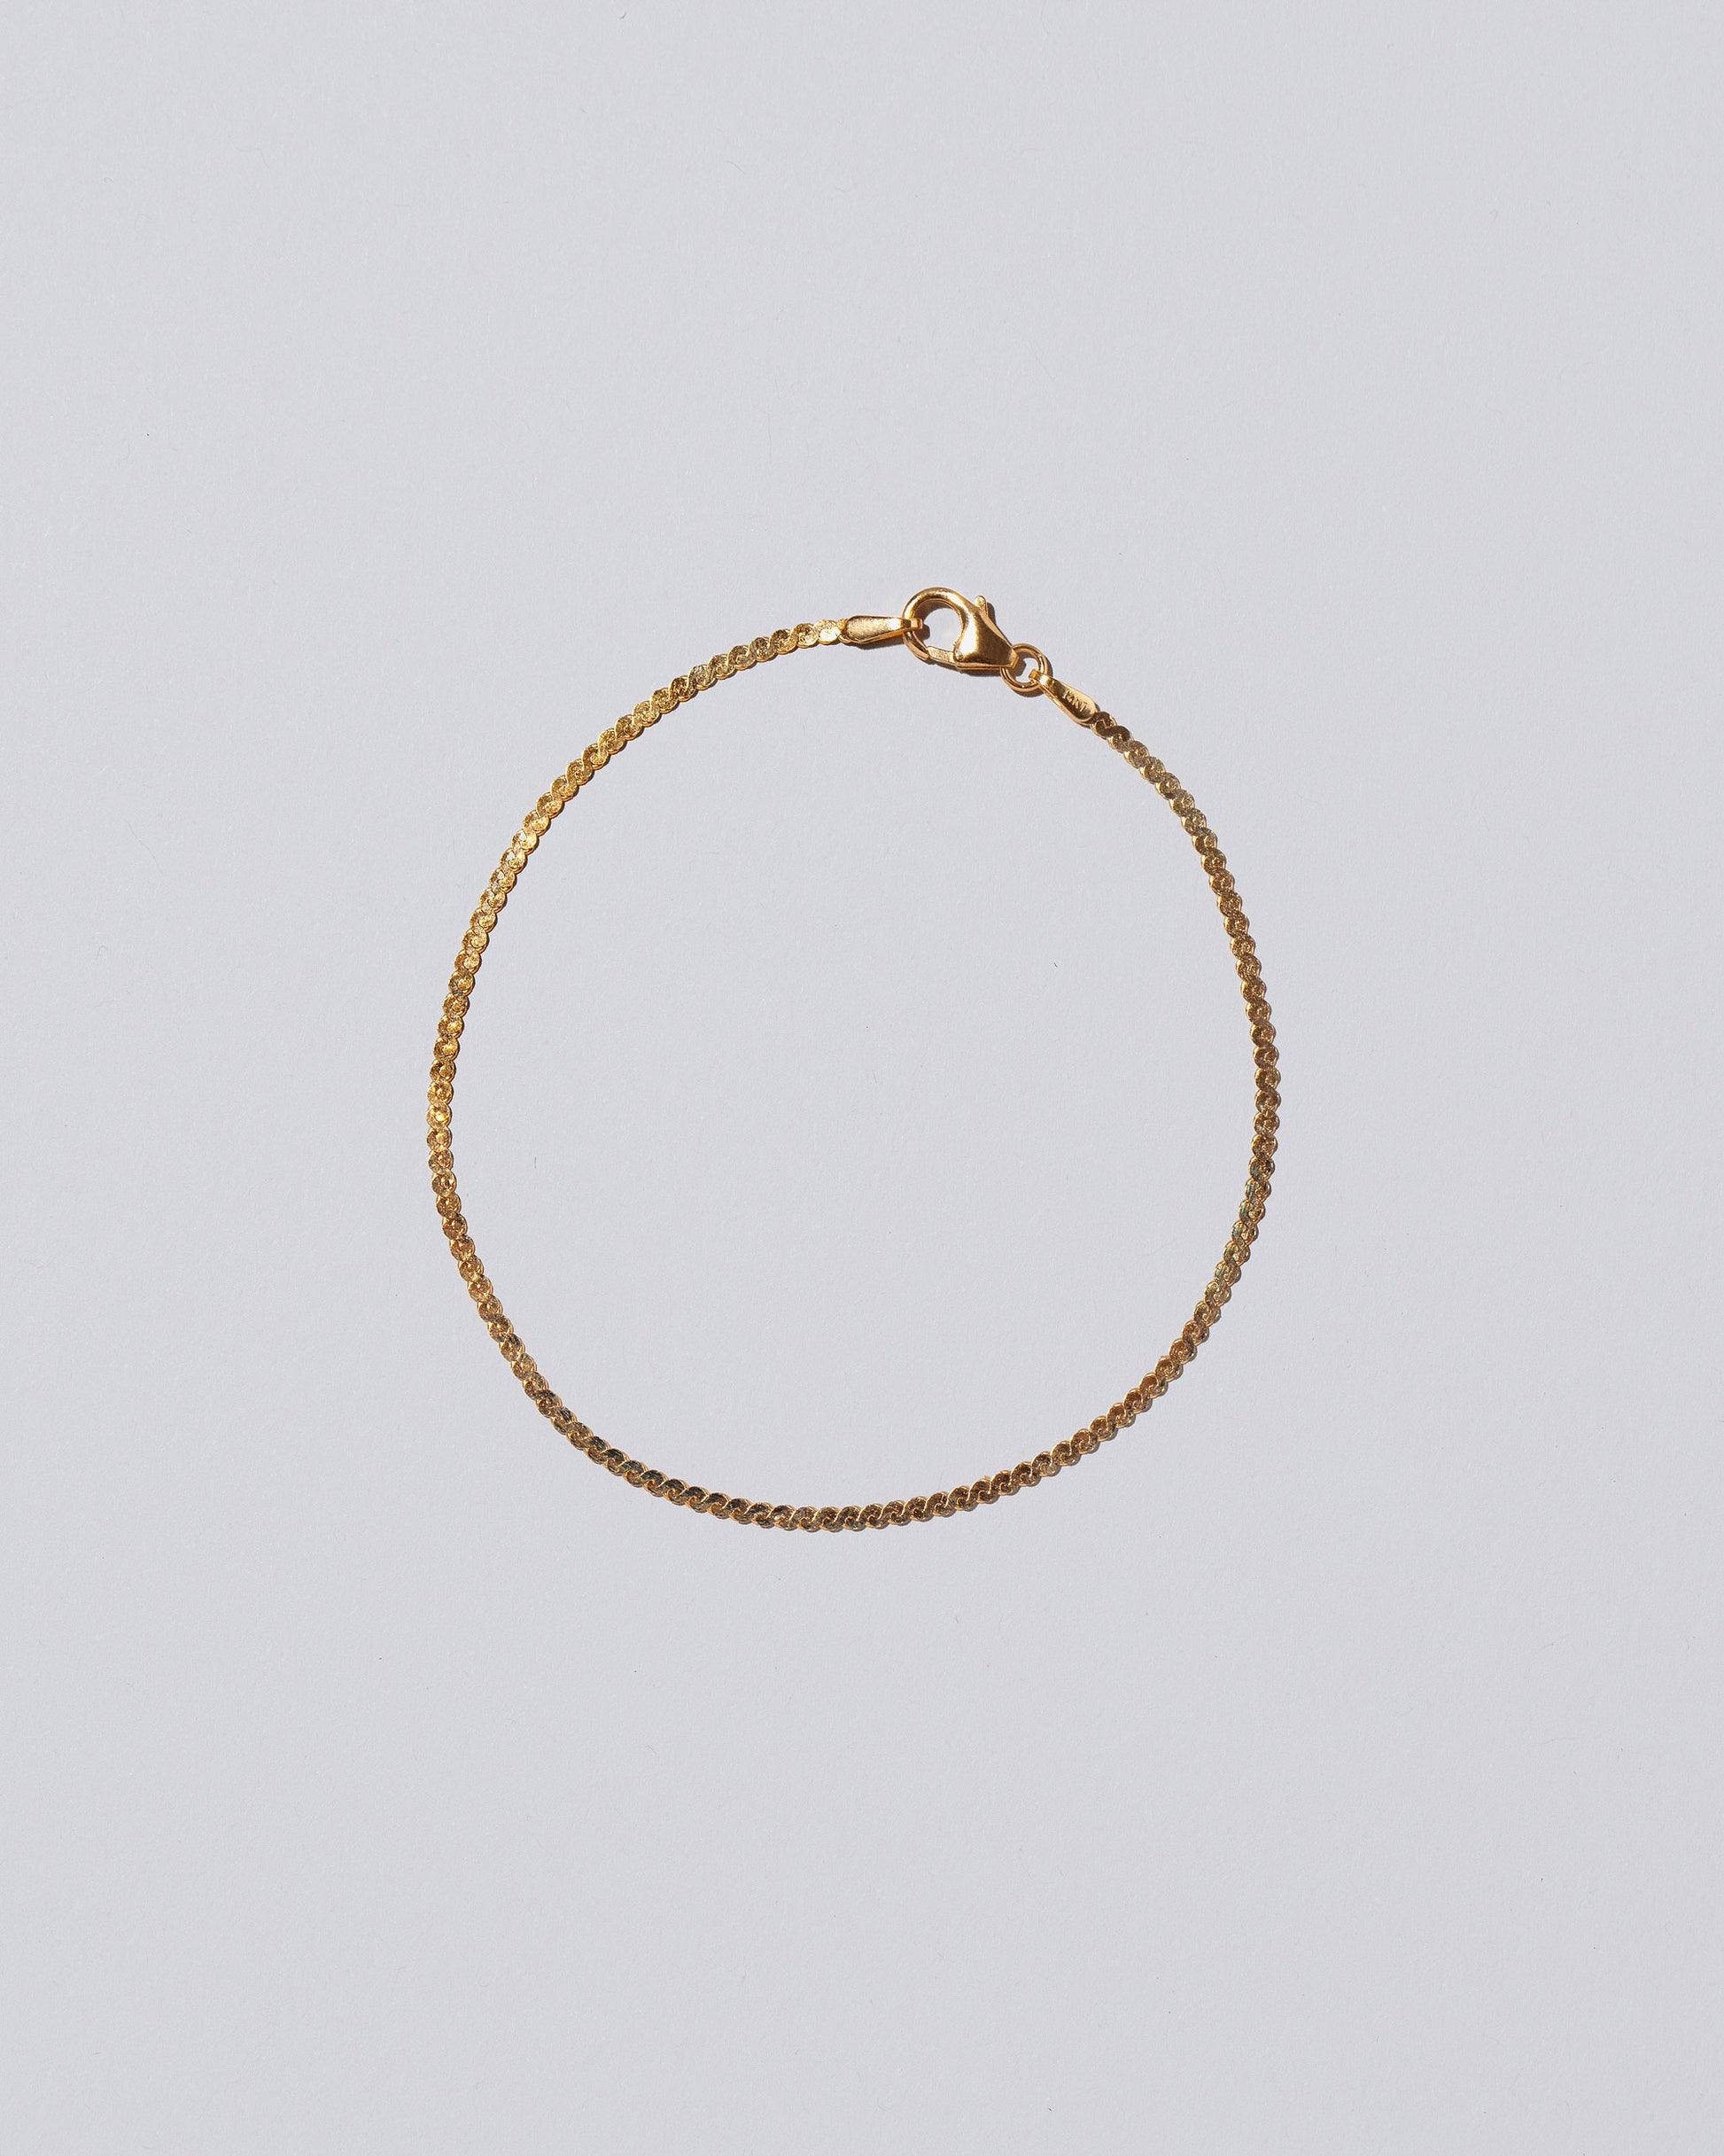 Yellow Gold Serpentina Chain Bracelet on light color background.